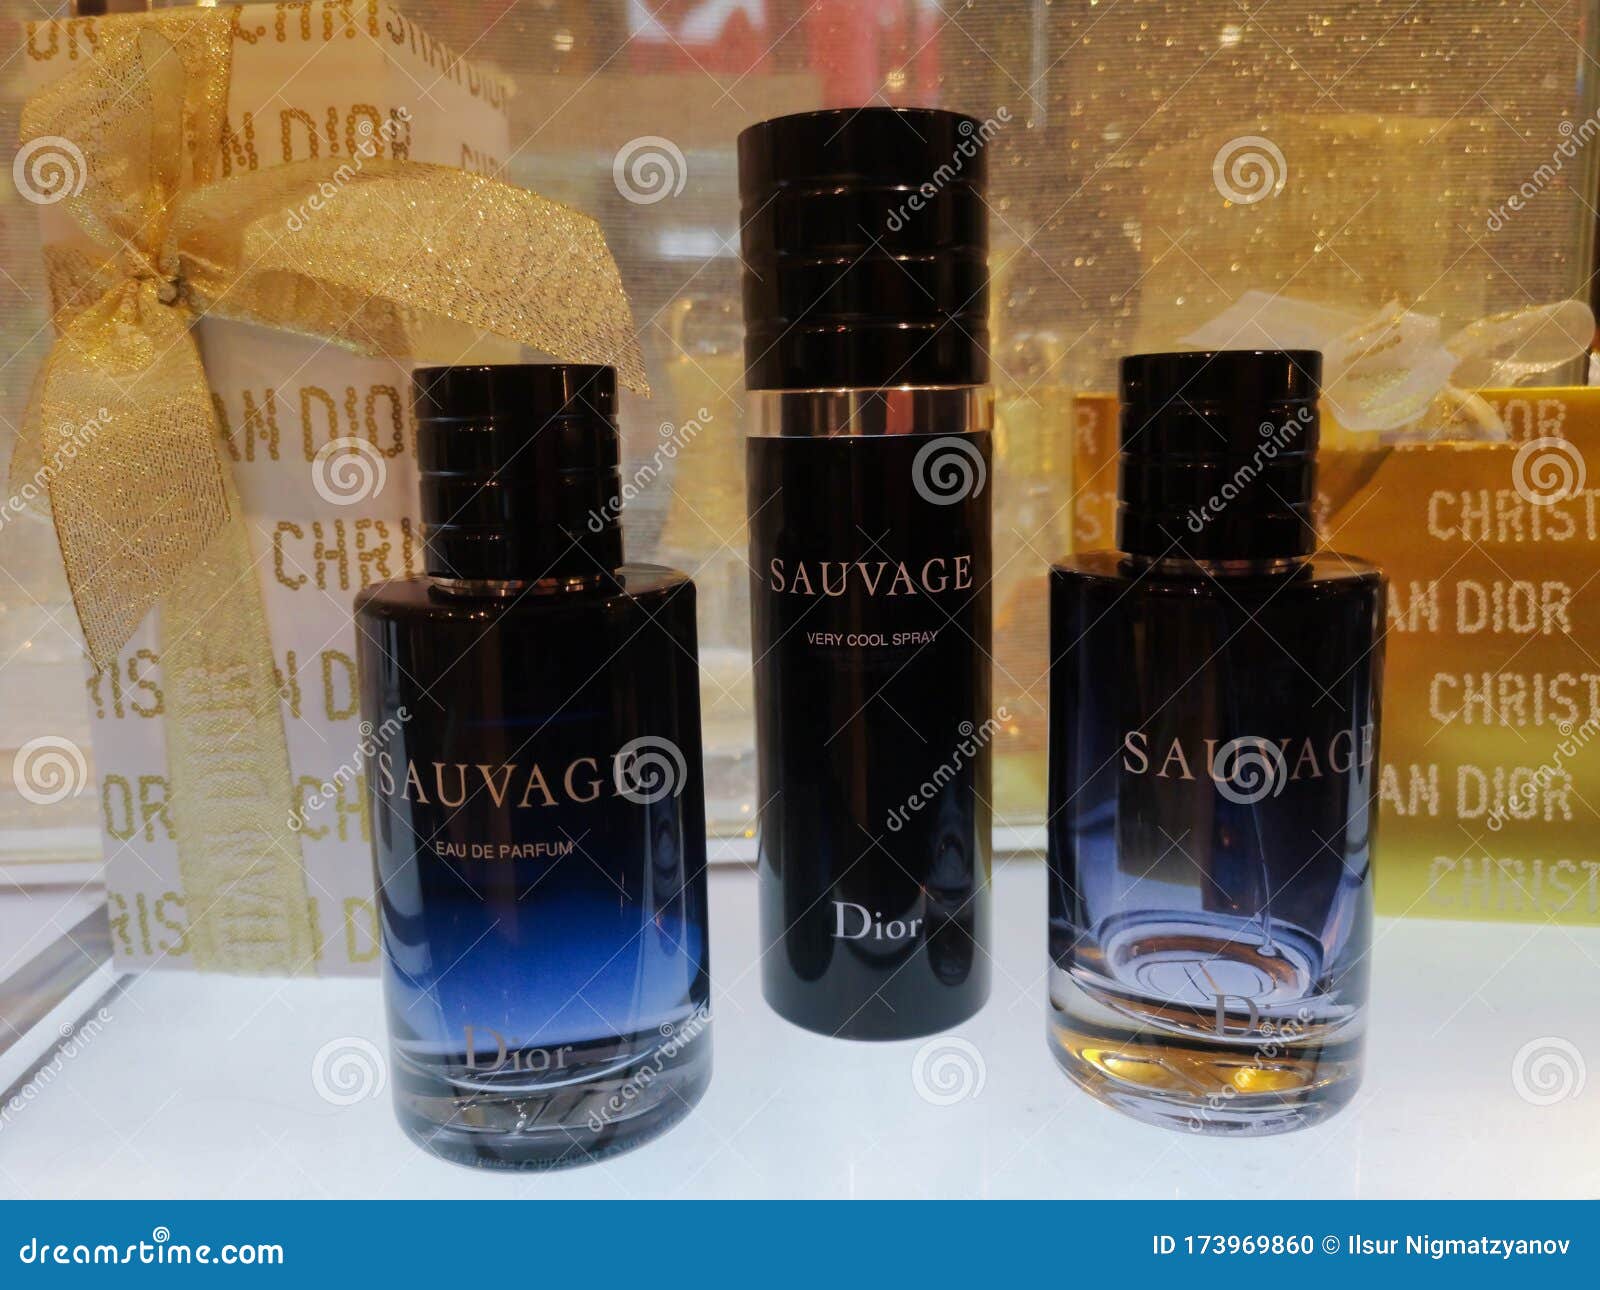 dior sauvage in store